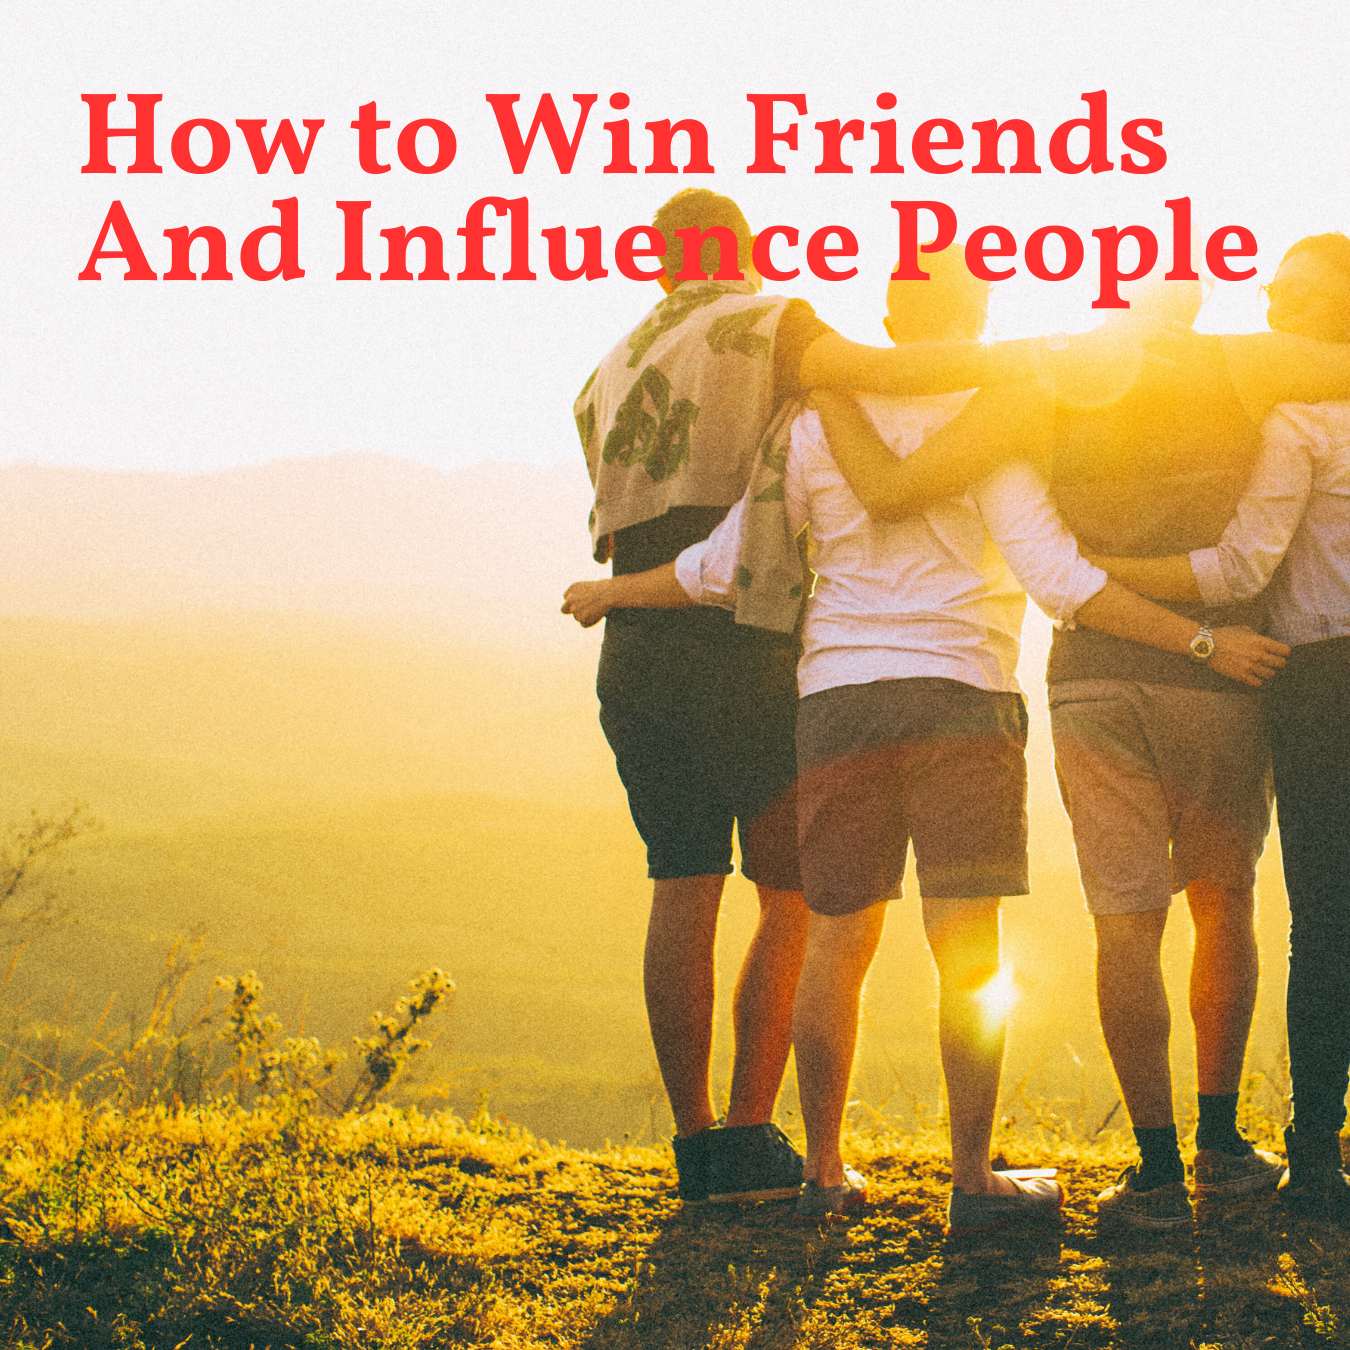 How to Win Friends And Influence People_tipsforfits.com